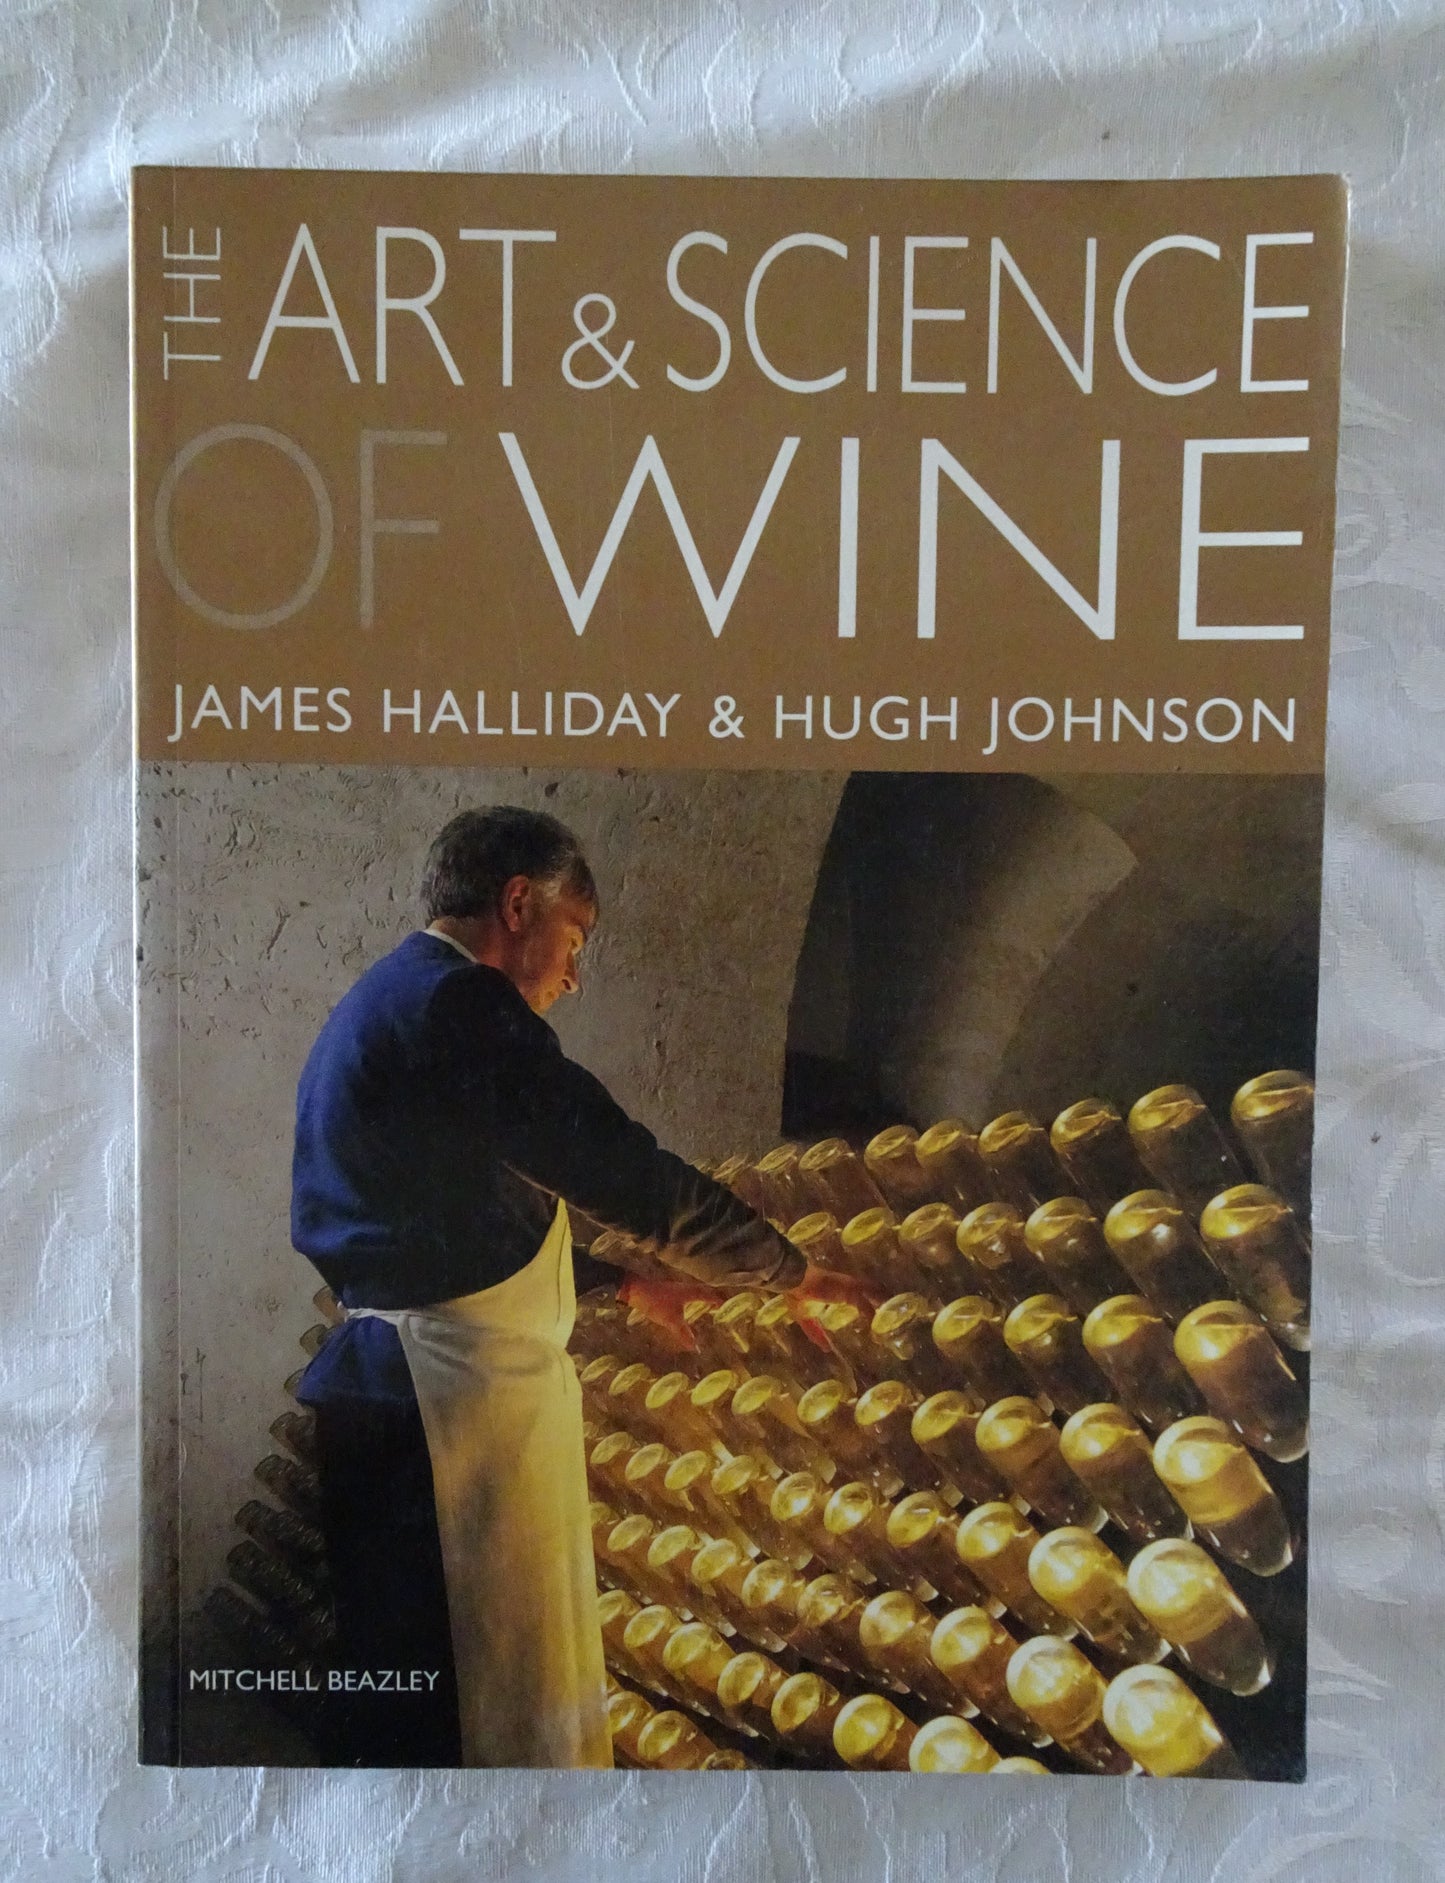 The Art & Science of Wine by James Halliday and Hugh Johnson